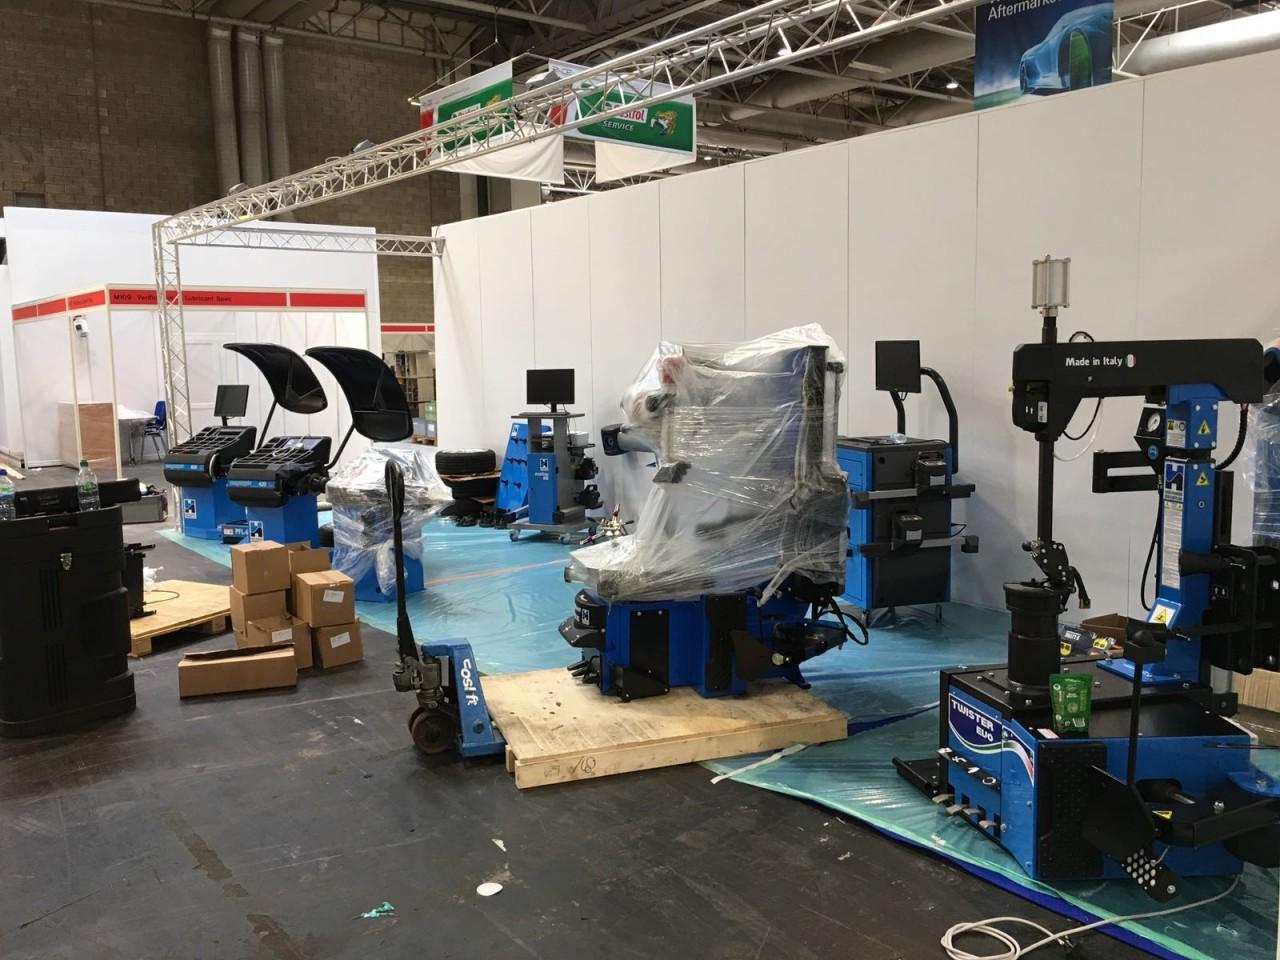 Getting the display for Automechanika 2018 ready